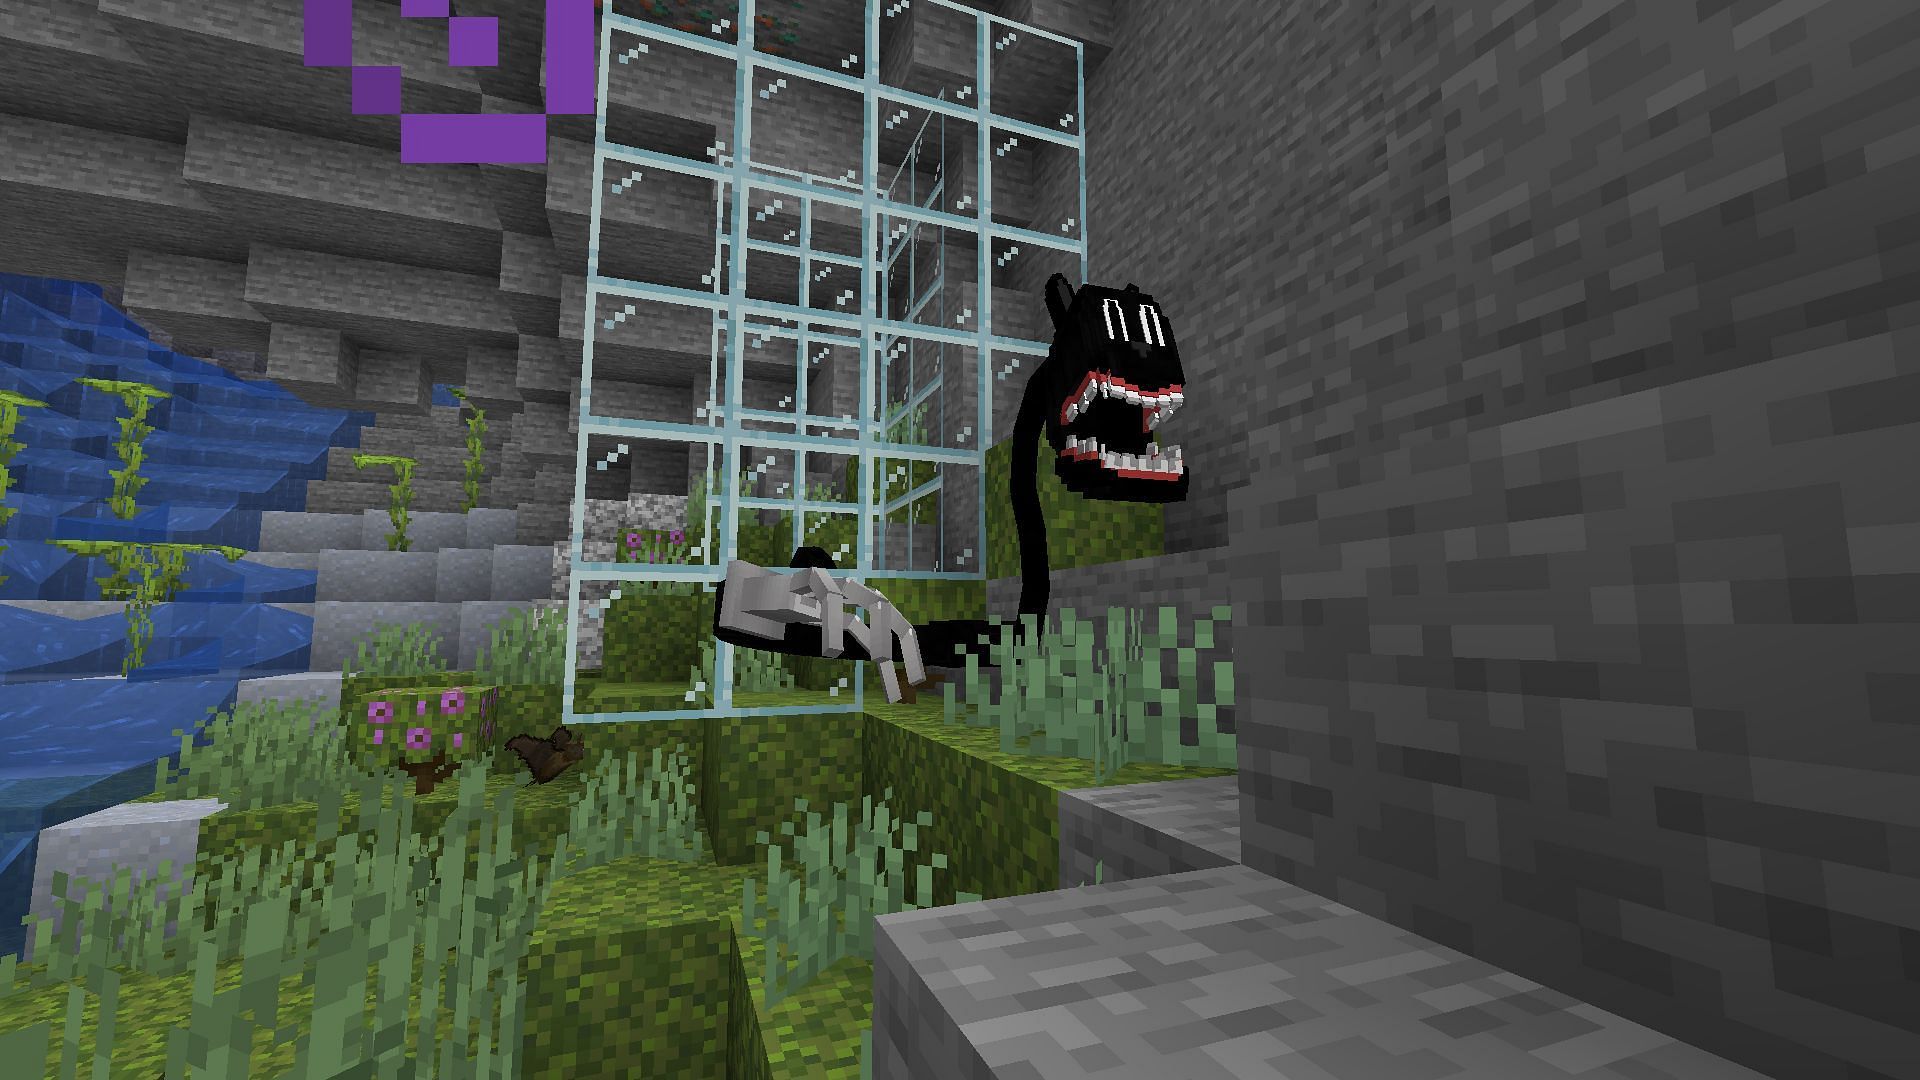 The Cartoon Dweller in its crawling animation in Minecraft (Image via Mojang)